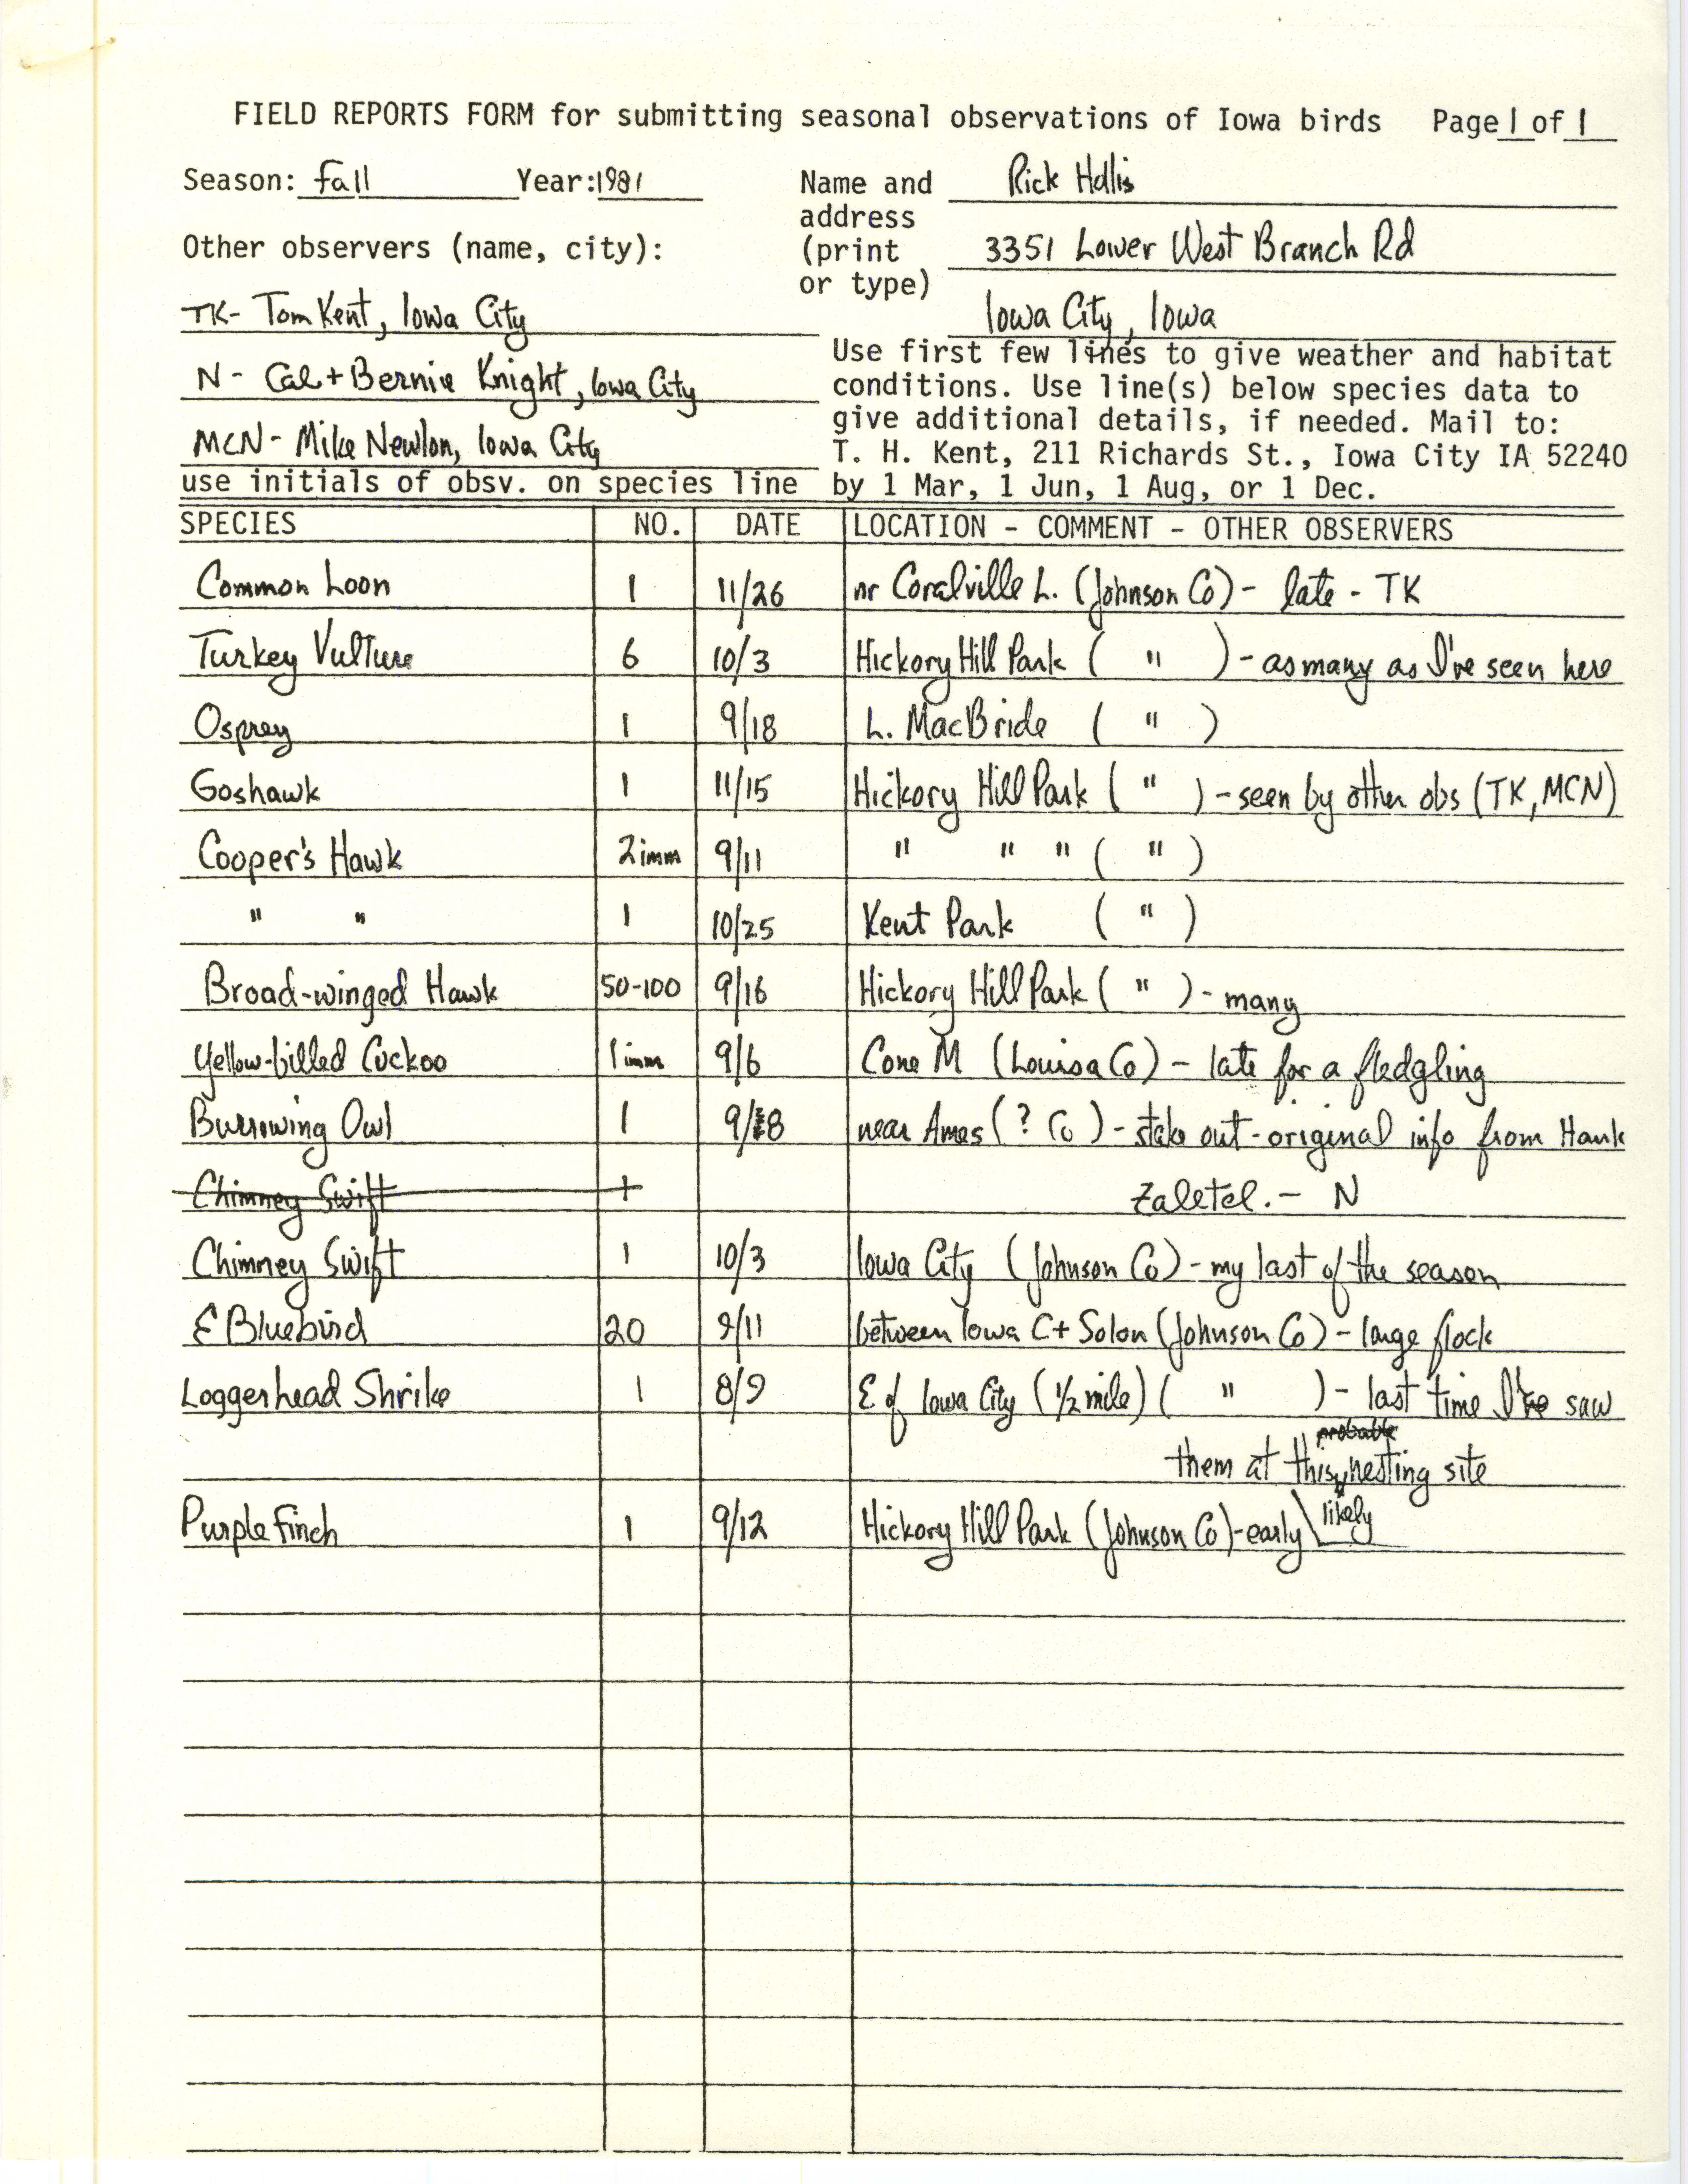 Field notes contributed by Richard Jule Holllis with verifying documentation, fall 1981